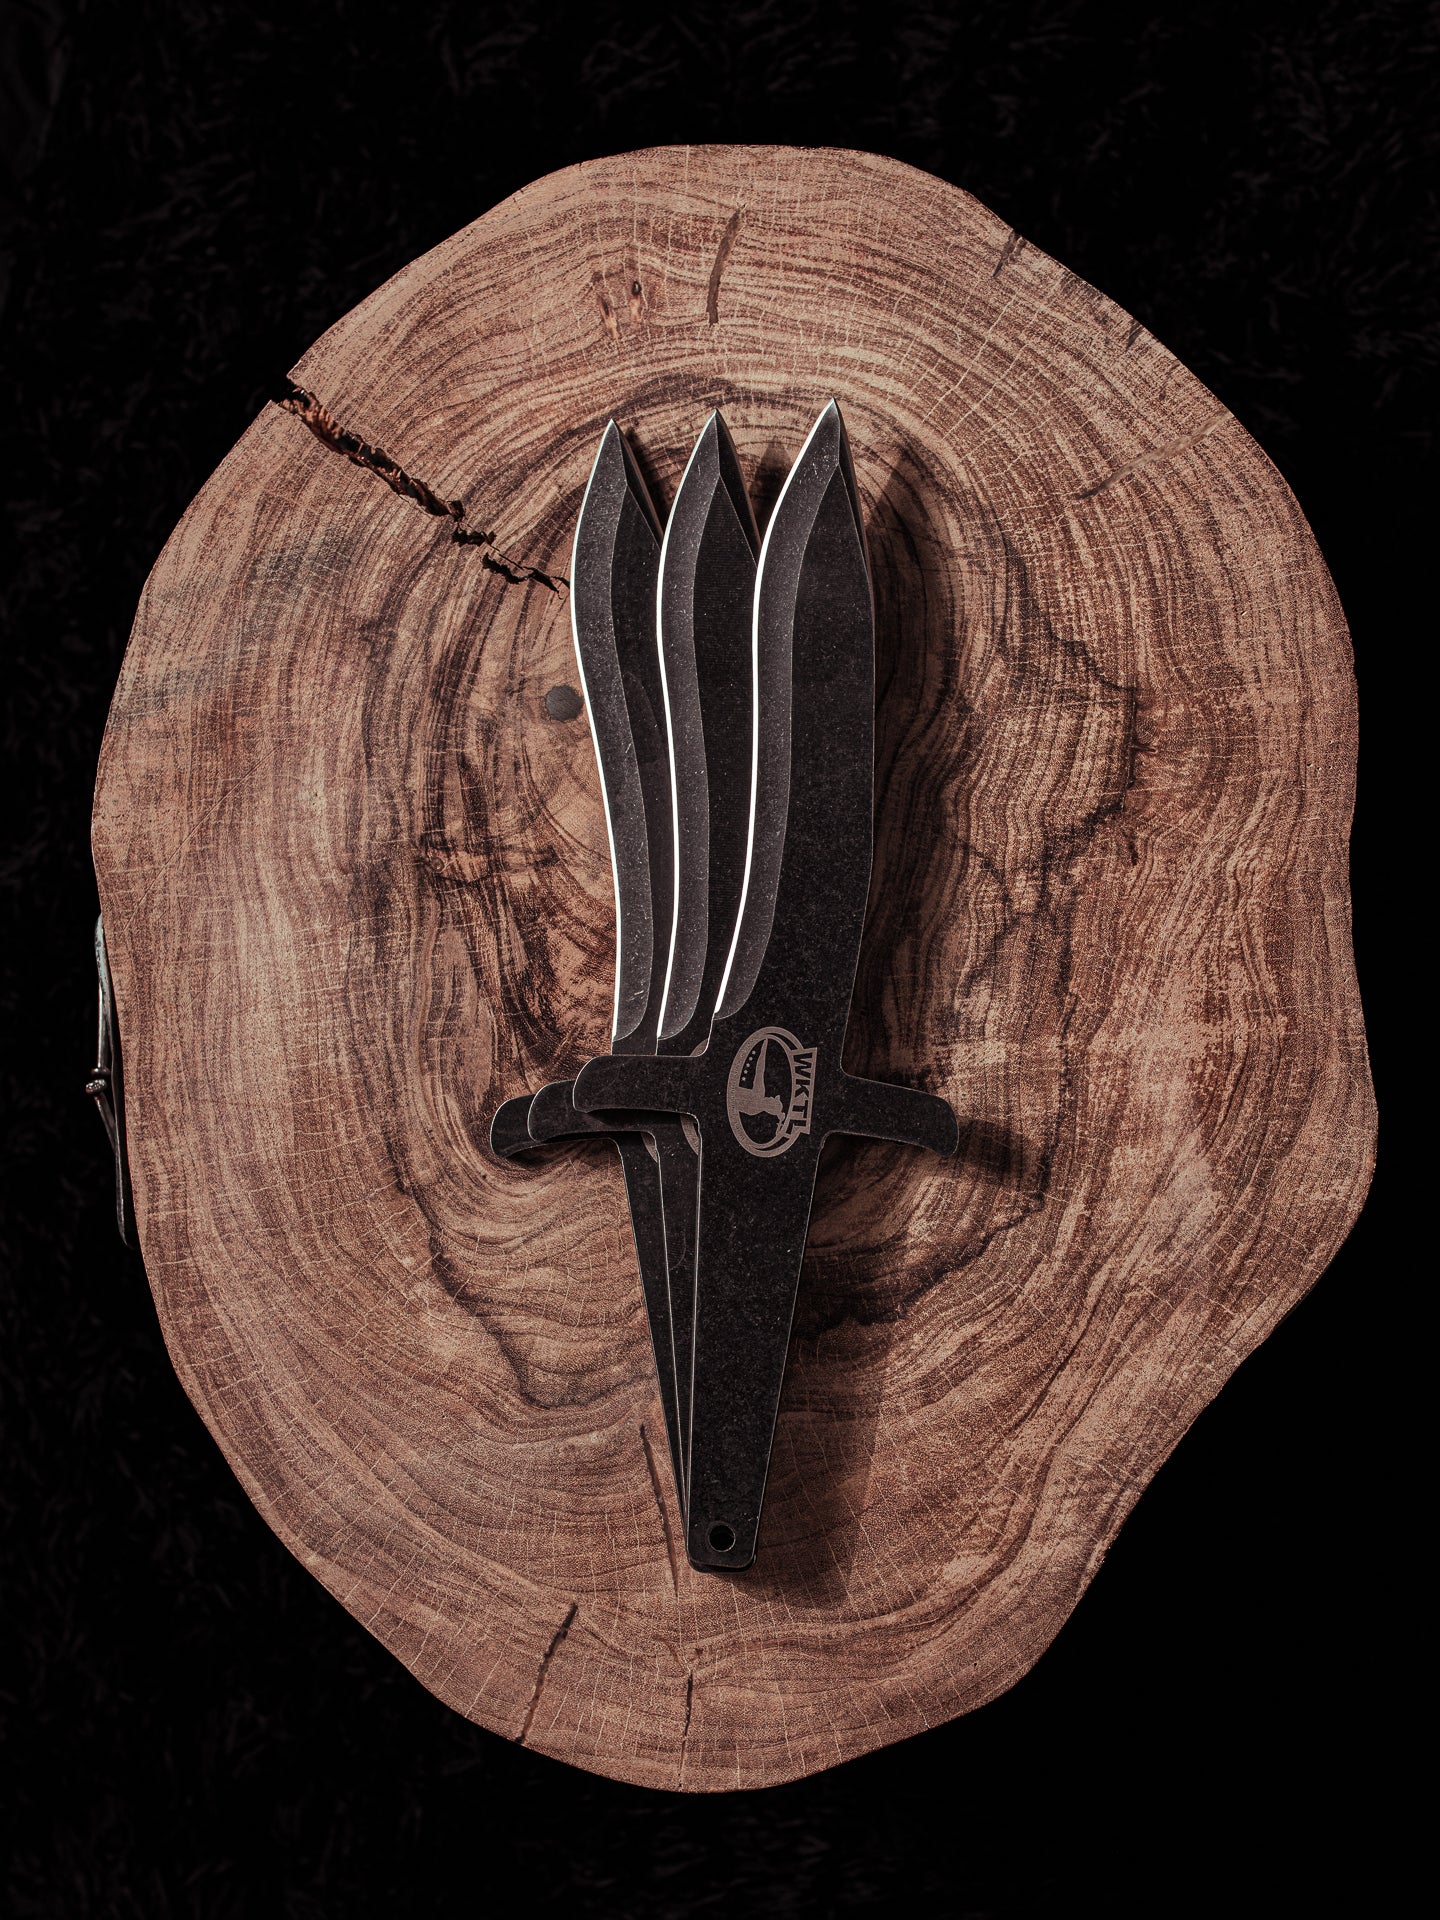 World Knife Throwing League (WKTL) Certified Competition Throwing Knife, The Raptor